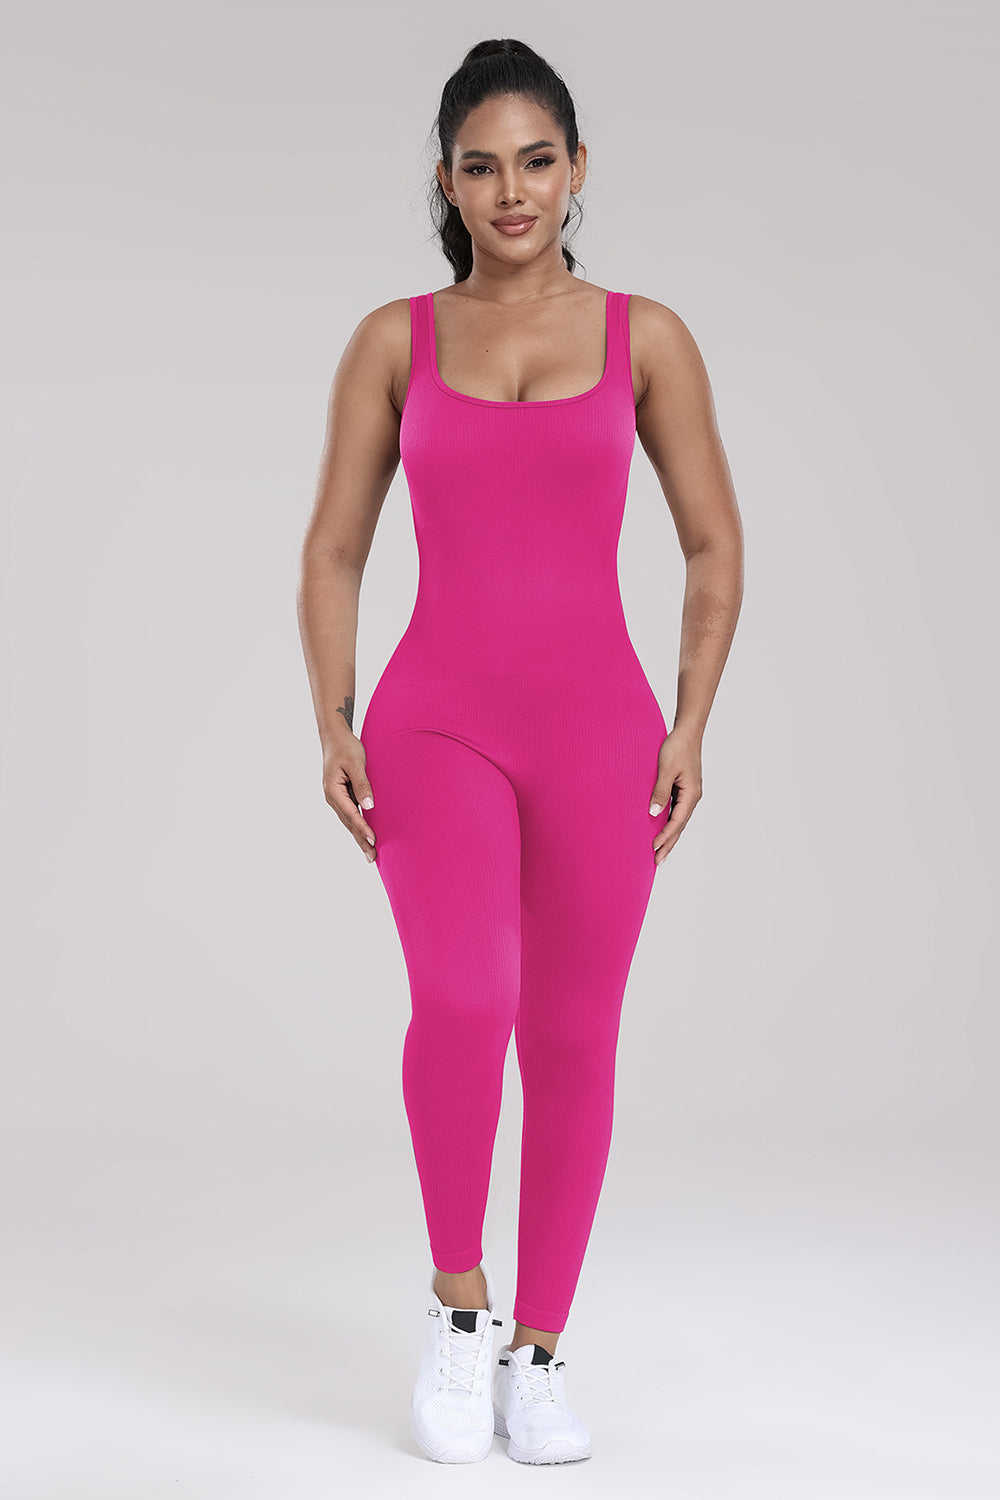 Wide Strap Sleeveless Active Jumpsuit Sunset and Swim Hot Pink S 